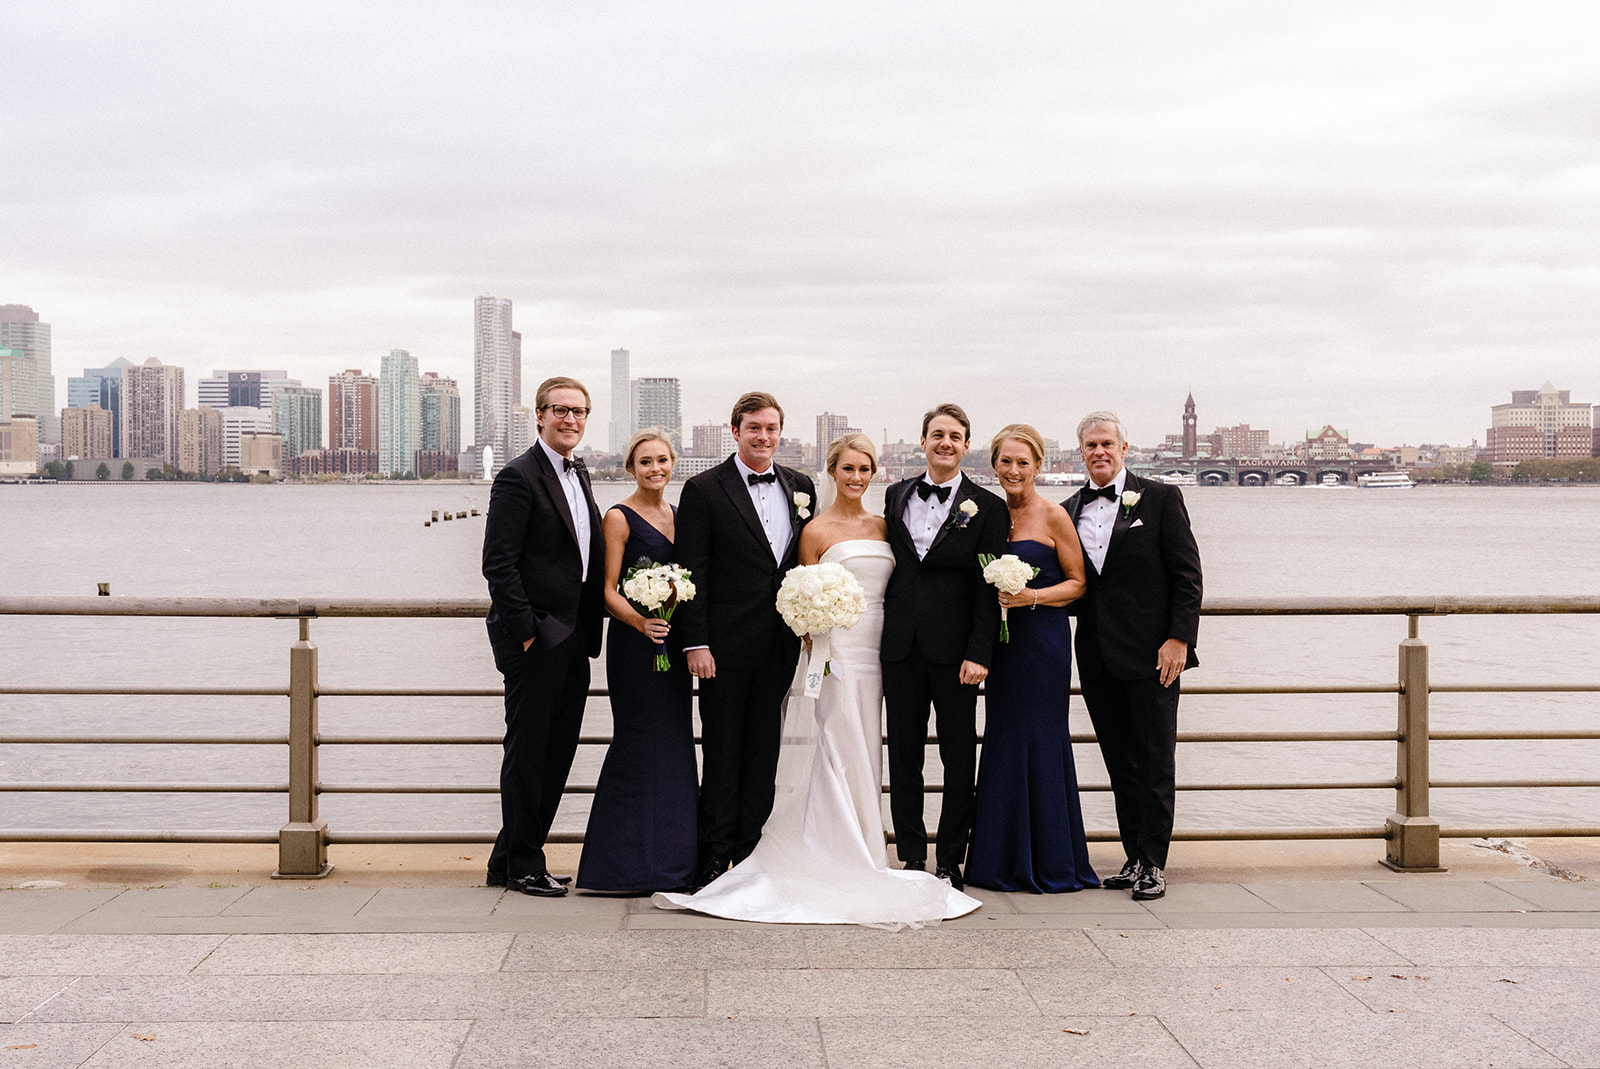 Top 4 Luxury Wedding Venues in New York. Couple with bridal party posing with view of the sea and city behind them.